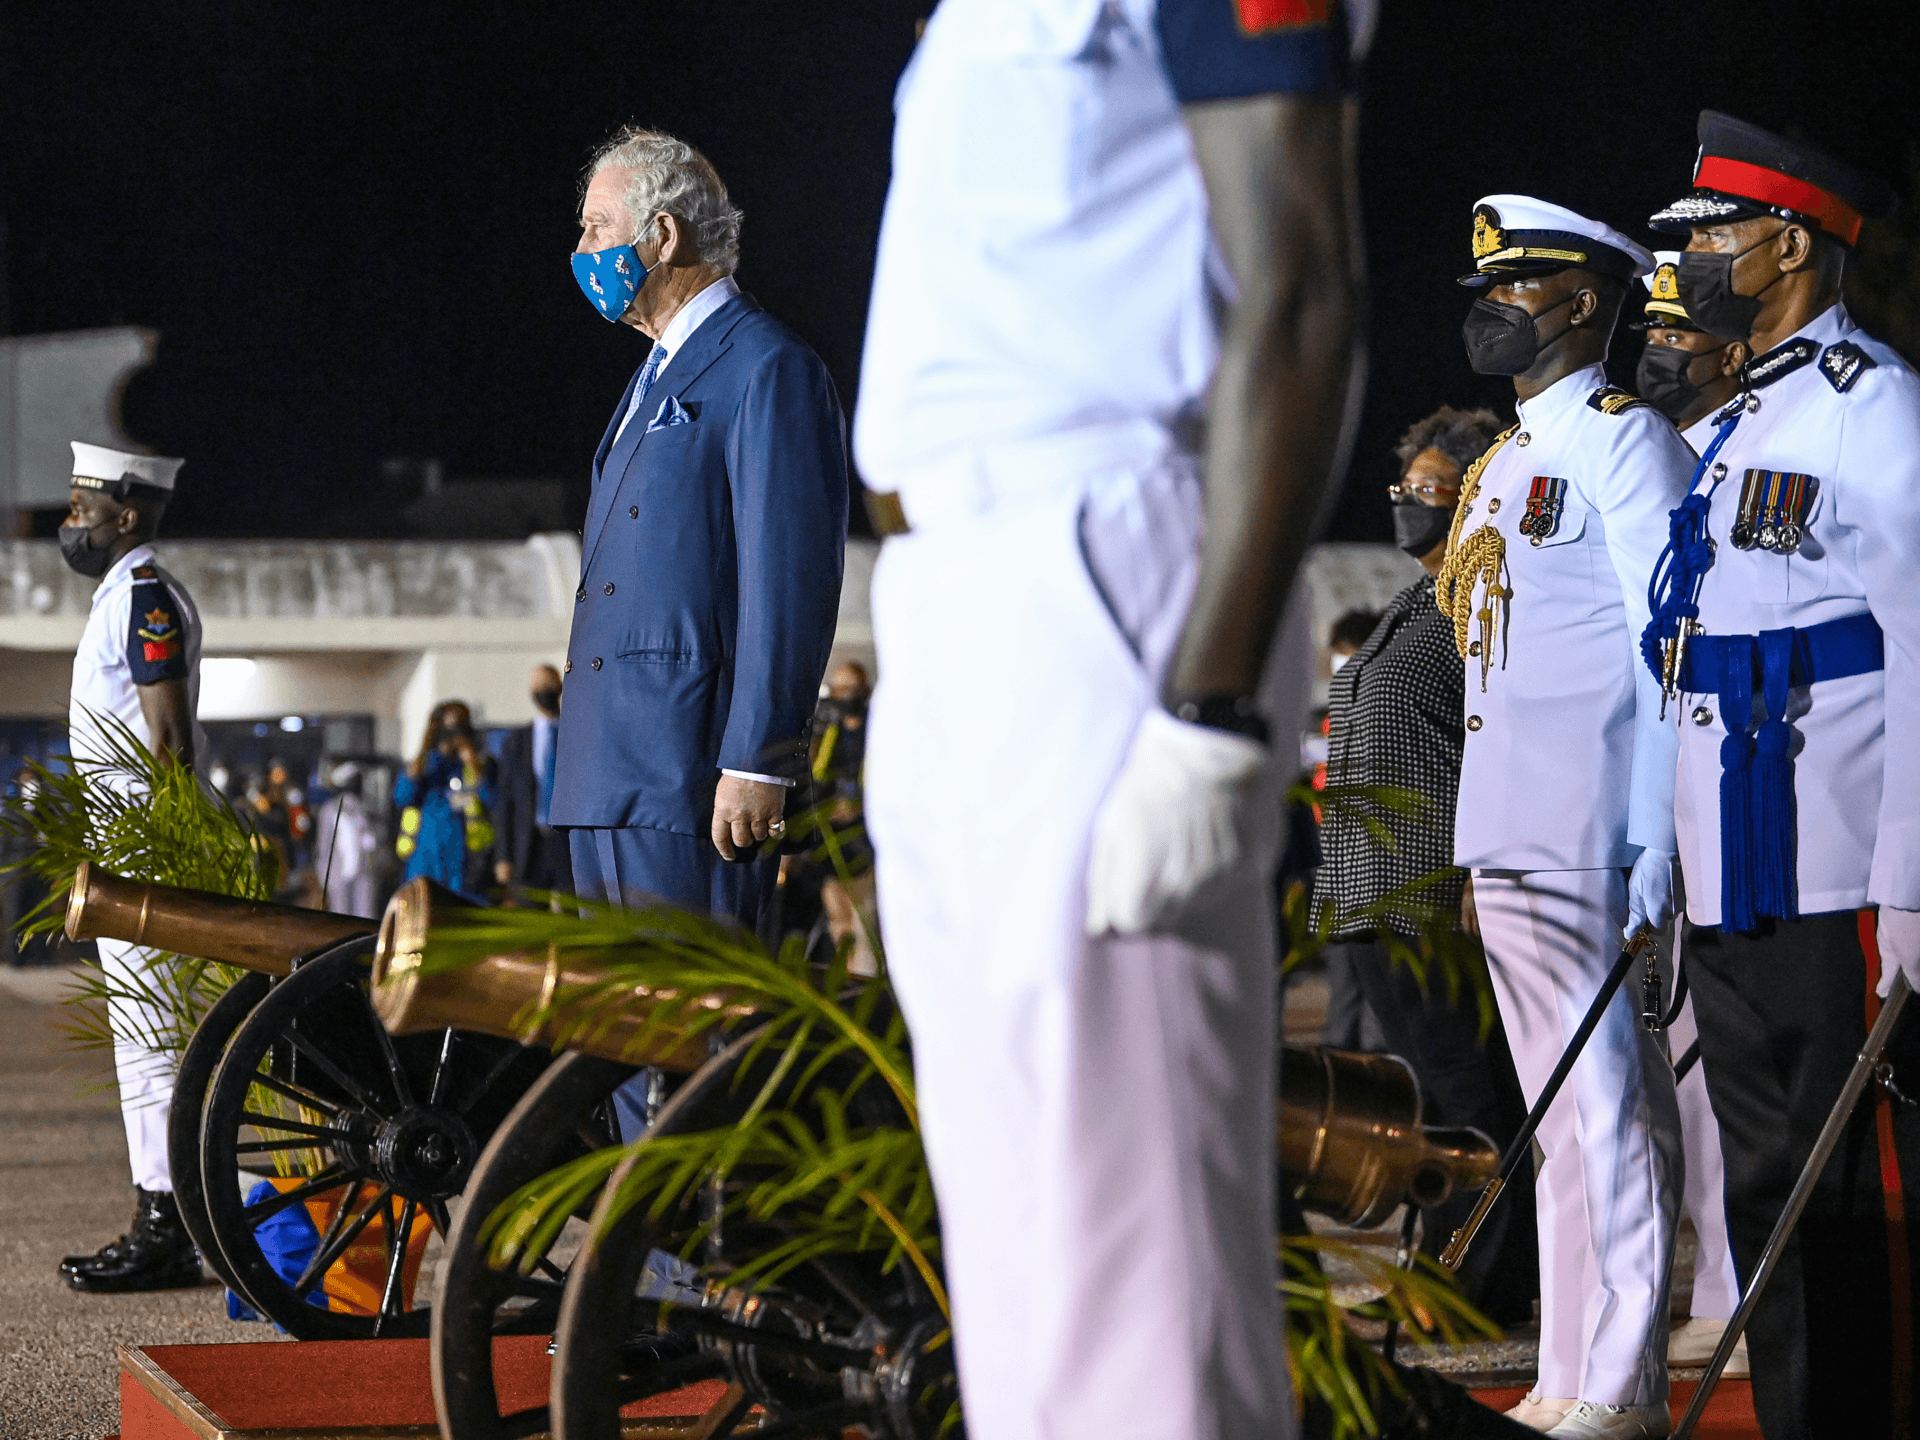 BRIDGETOWN, BARBADOS - NOVEMBER 28: Prince Charles, Prince of Wales arrives at Bridgetown Airport on November 28, 2021 in Bridgetown, Barbados. The Prince of Wales arrived in the country ahead of its transition to a republic within the Commonwealth. This week, it formally removes Queen Elizabeth as its head of state and the current governor-general, Dame Sandra Mason, will be sworn in as president. (Photo by Jeff J Mitchell/Getty Images)